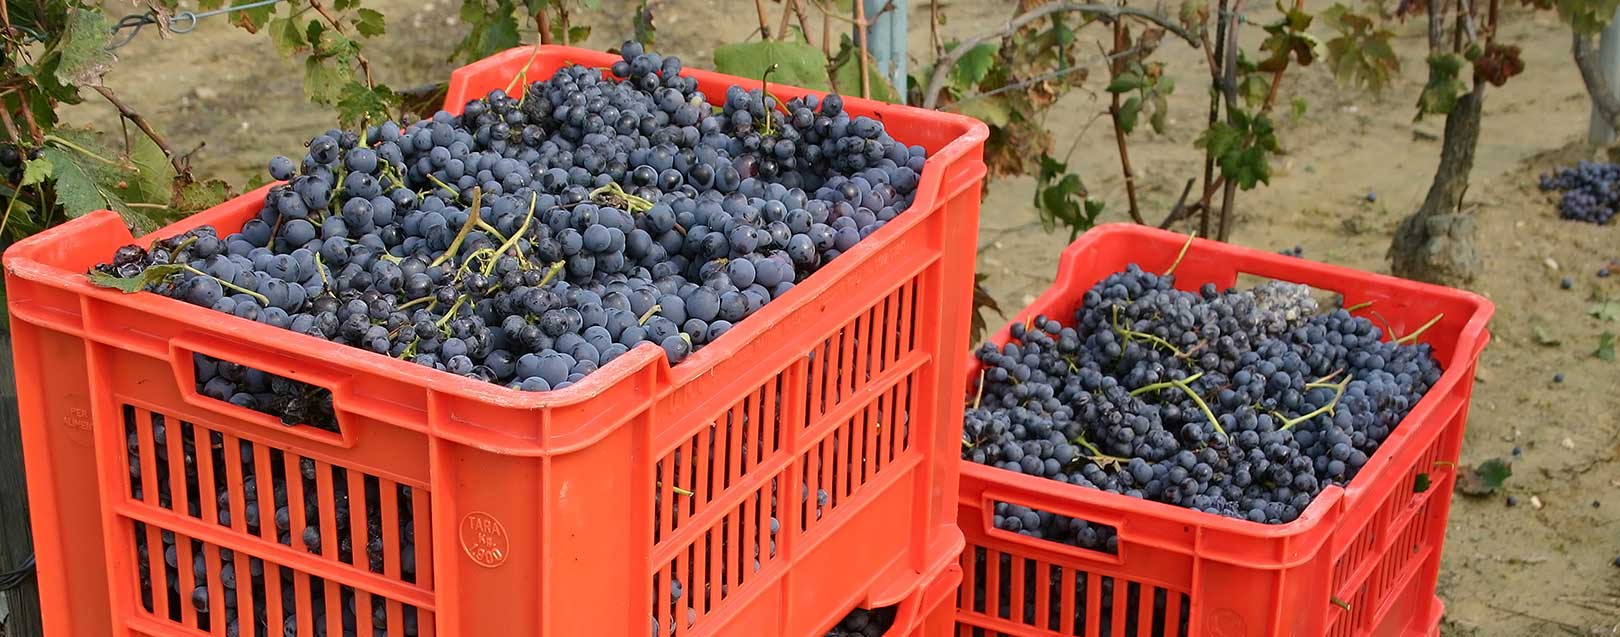 Indian grape exports to Europe doubled in FY 2016